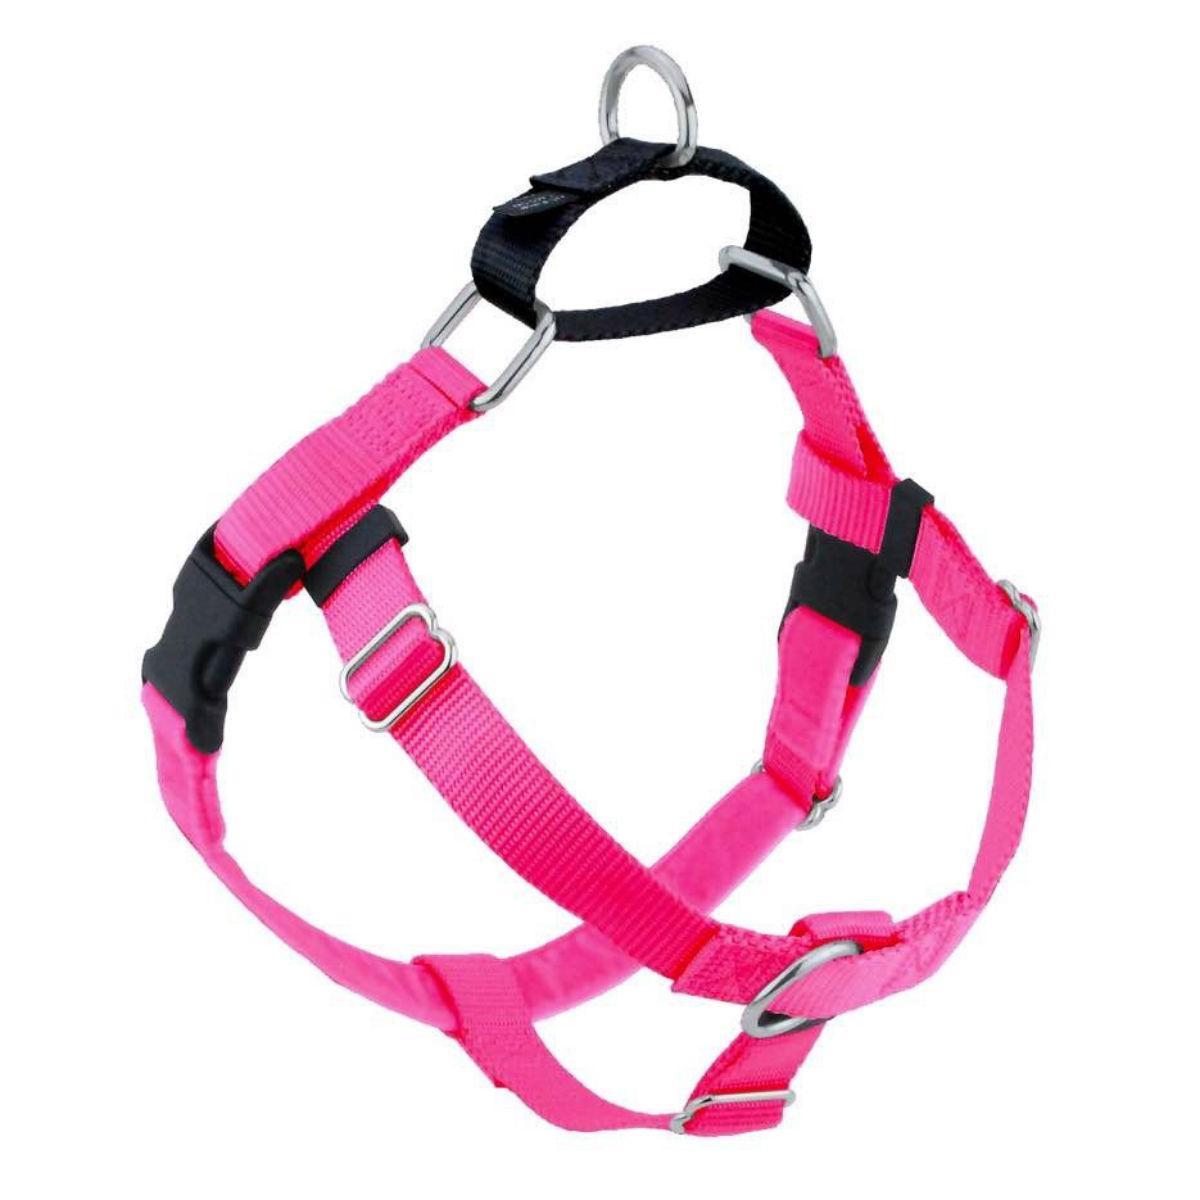 2 Hounds Design No-Pull Dog Harness Deluxe Training Package - Hot Pink and Black